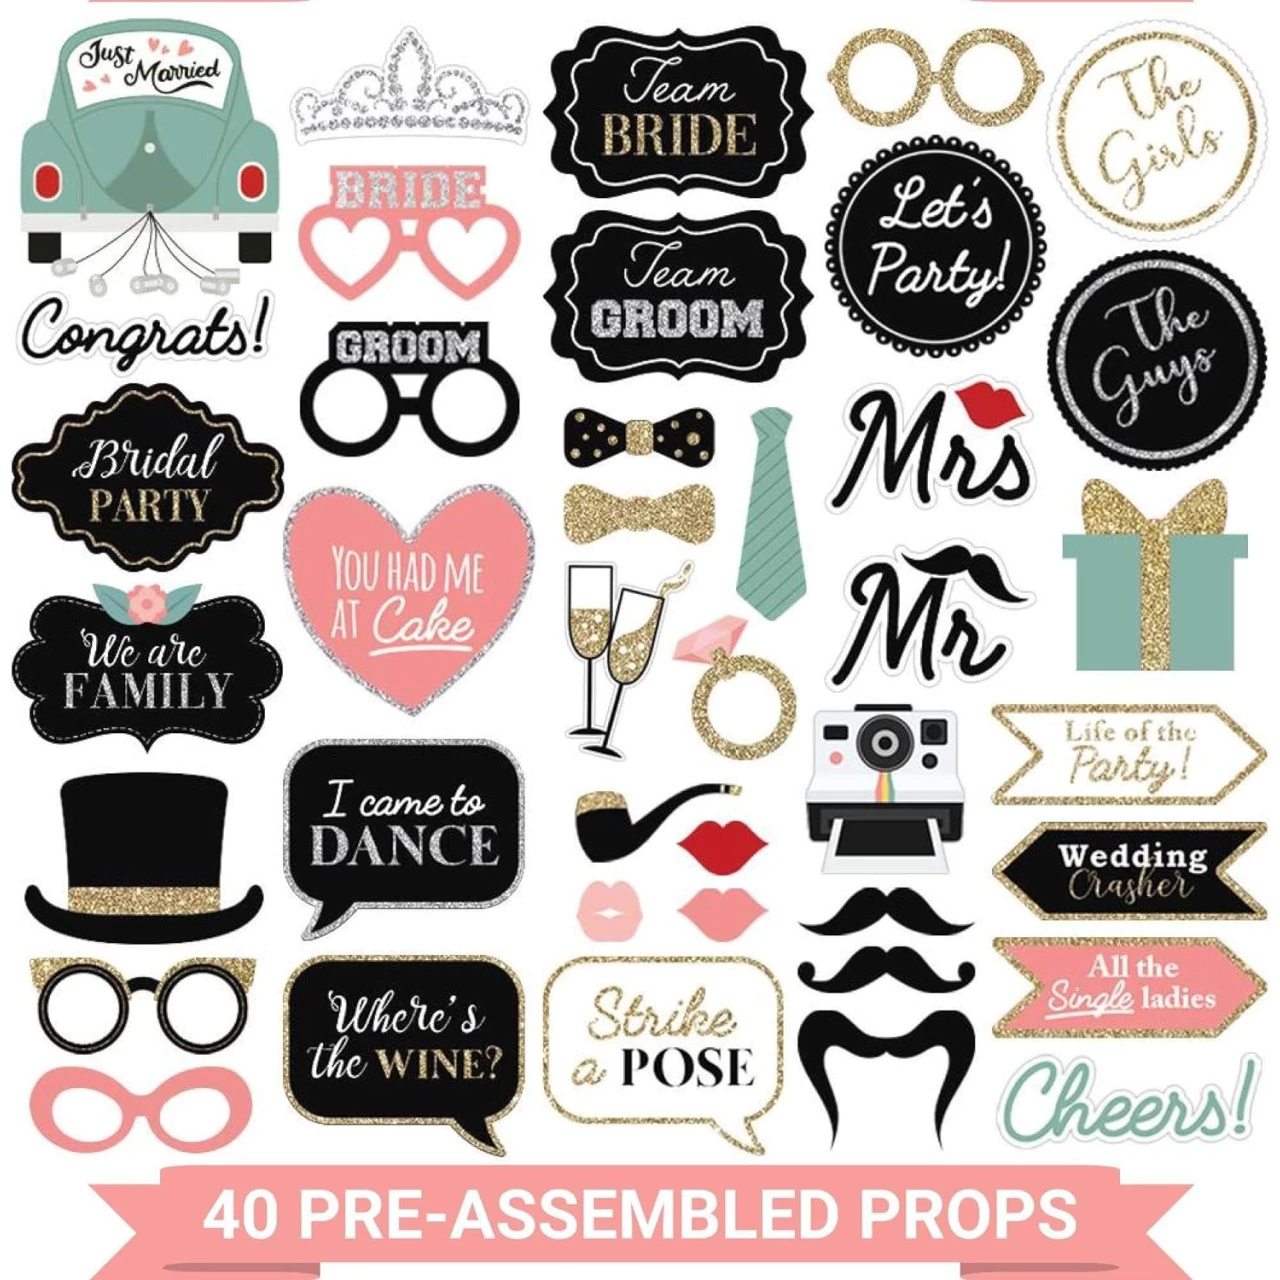 Fully Assembled Wedding Photo Booth Props - Set of 40 - Gold, Pink, Teal, &amp; Silver Selfie Signs - Wedding Party Supplies &amp; Decorations - Cute Wedding Designs with Real Glitter - Did we mention no DIY?